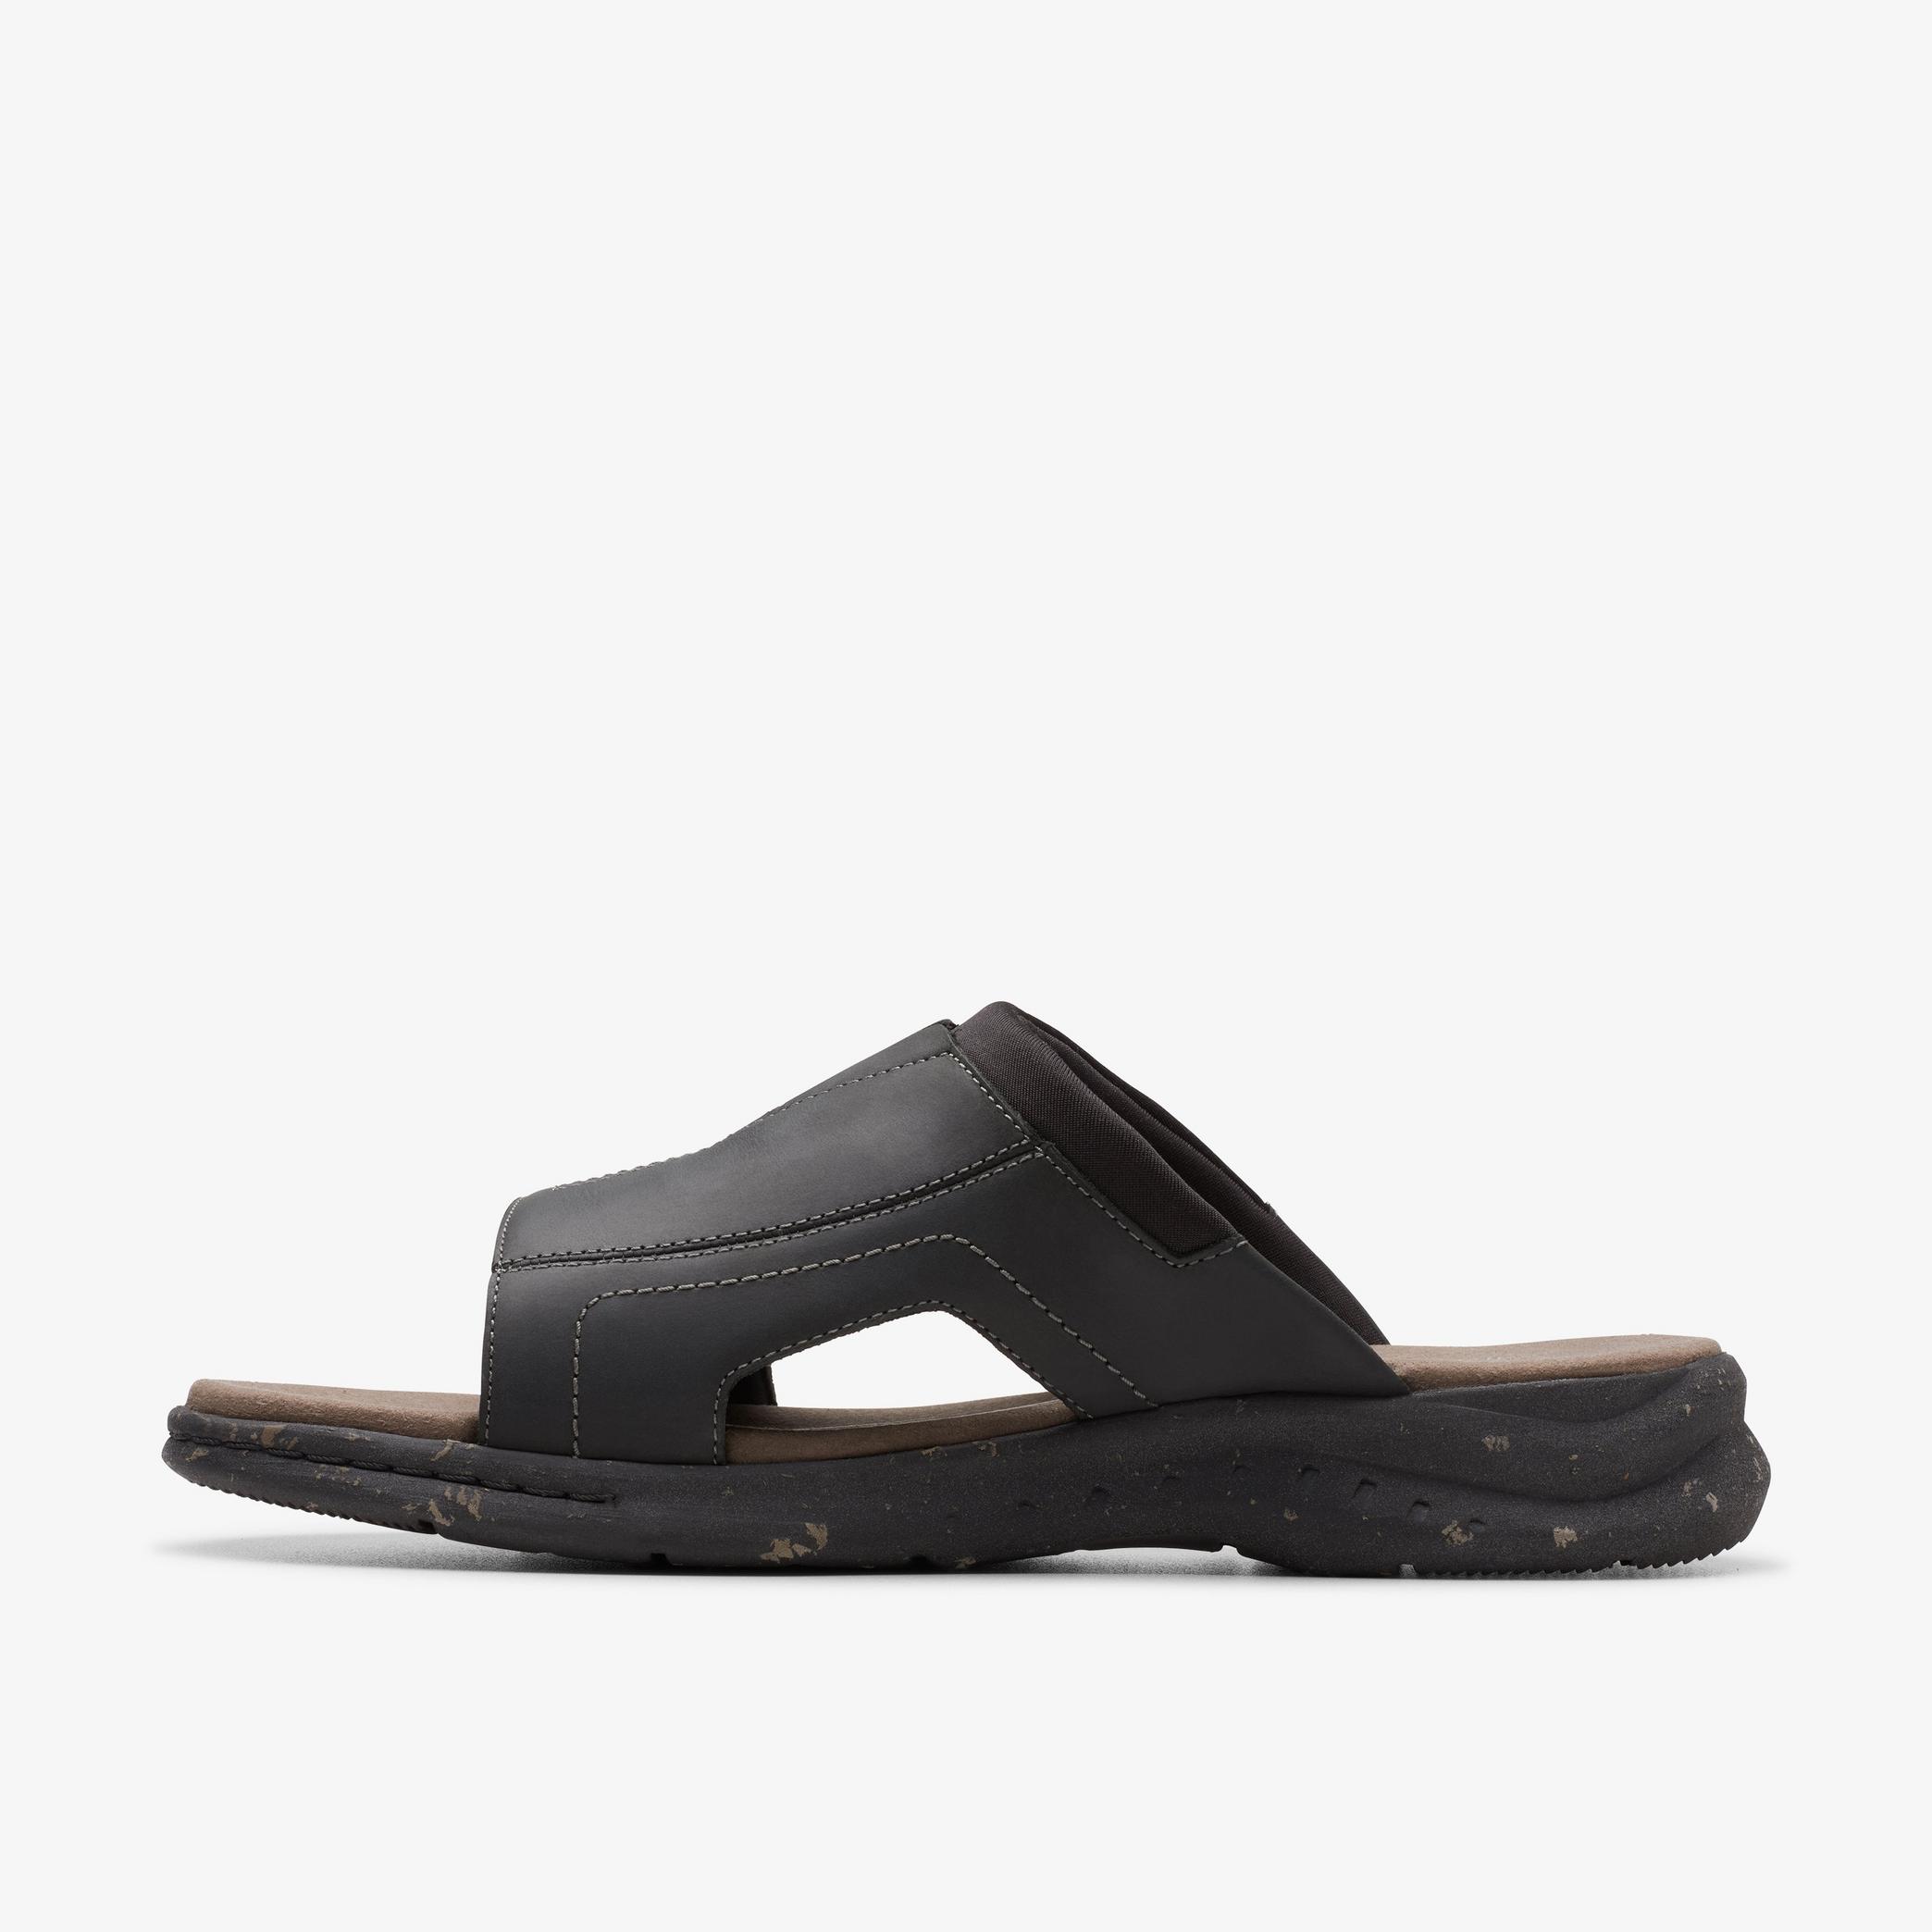 Walkford Band Black Leather Flat Sandals, view 2 of 6